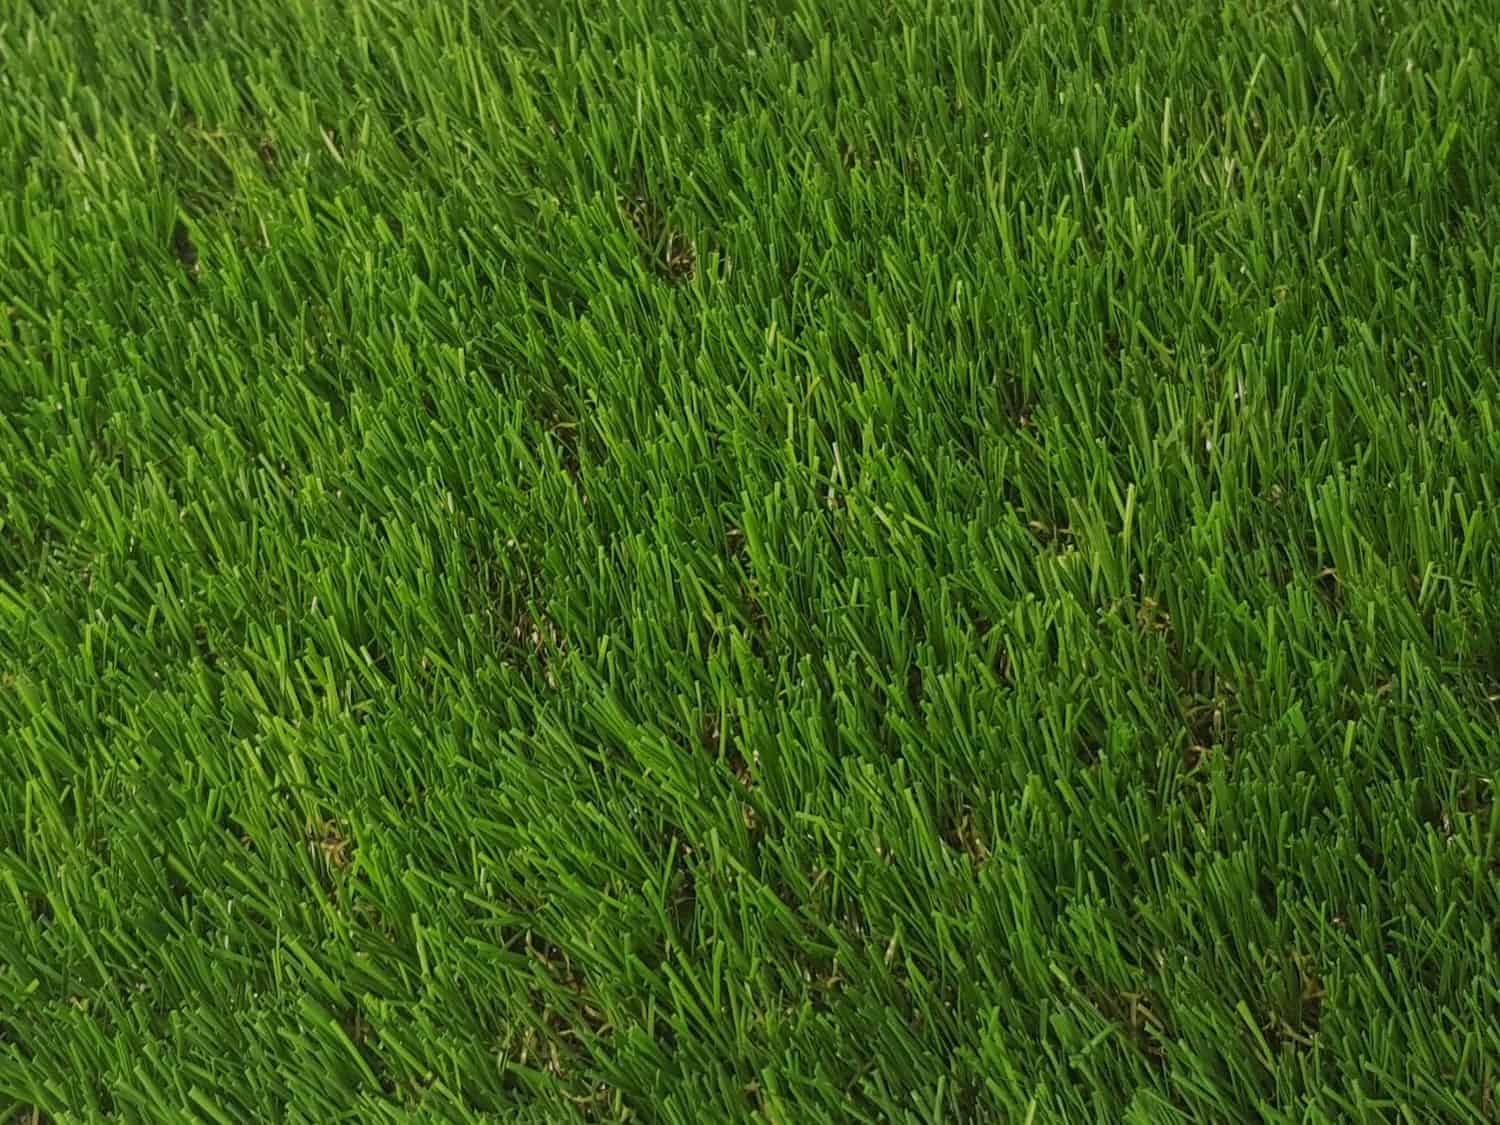 Prestige 35mm Pile Height Artificial Grass 2 x 3m of Cheap High Density Fake Turf Choose from 47 Sizes on this Listing Cheap Natural & Realistic Looking Astro Garden Lawn